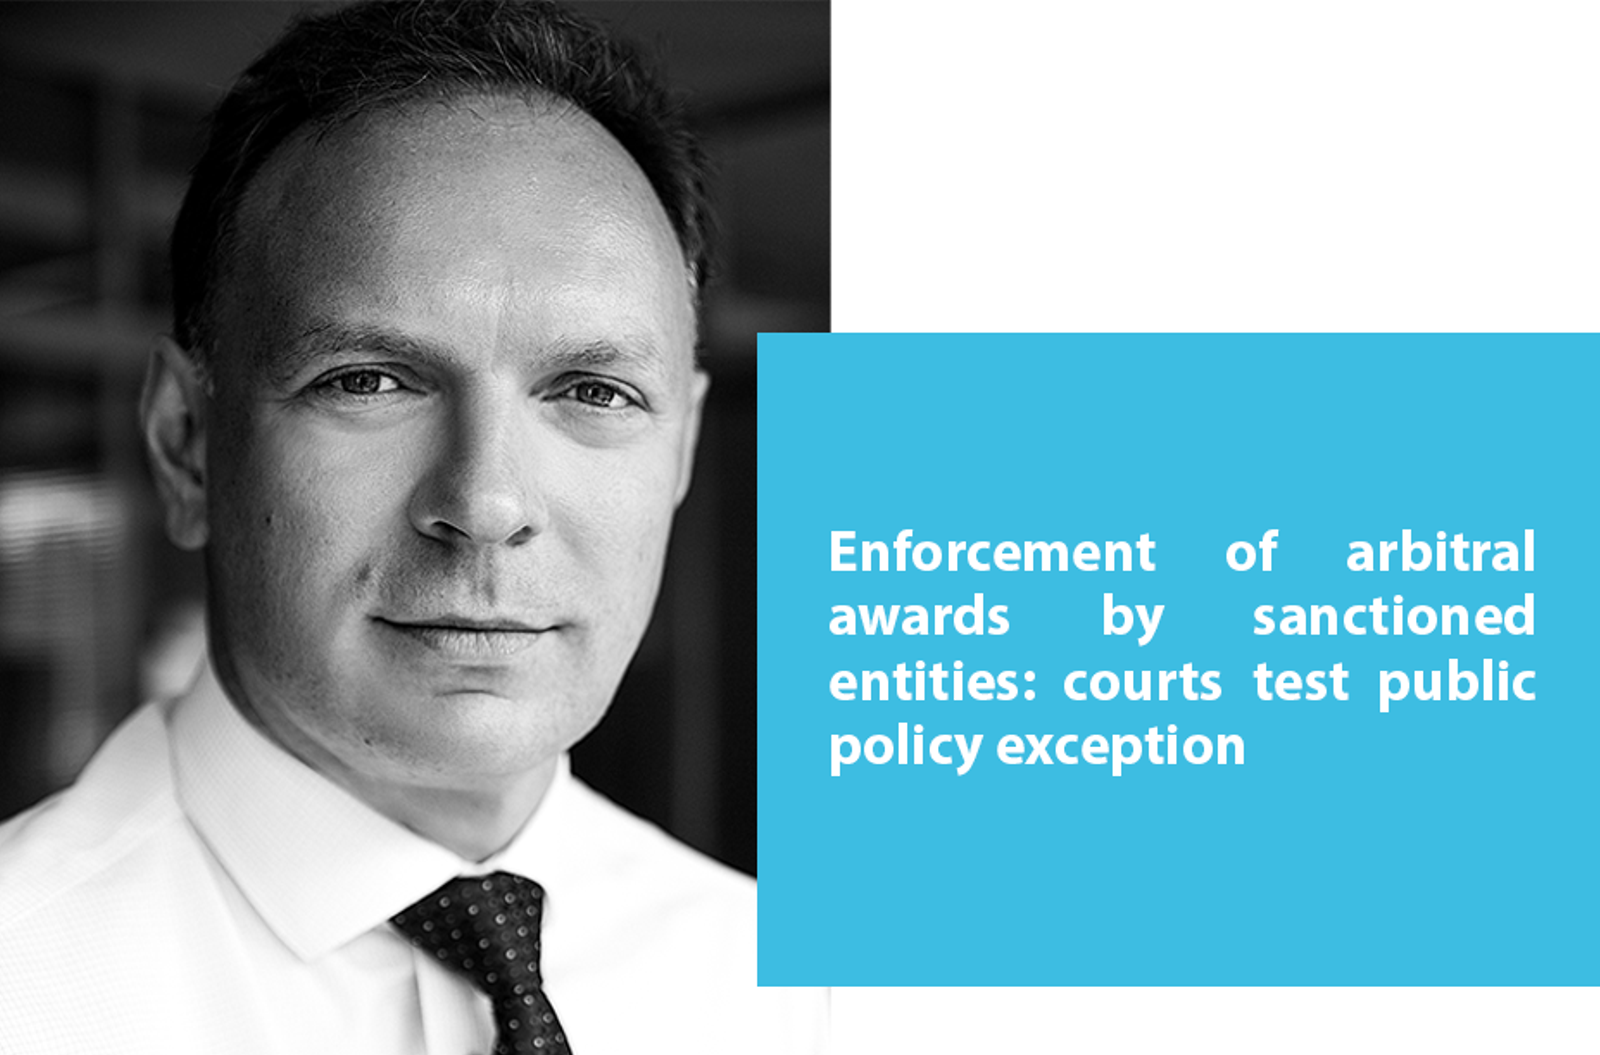 Vsevolod Volkov on enforcement of arbitral awards by sanctioned entities: courts test public policy exception